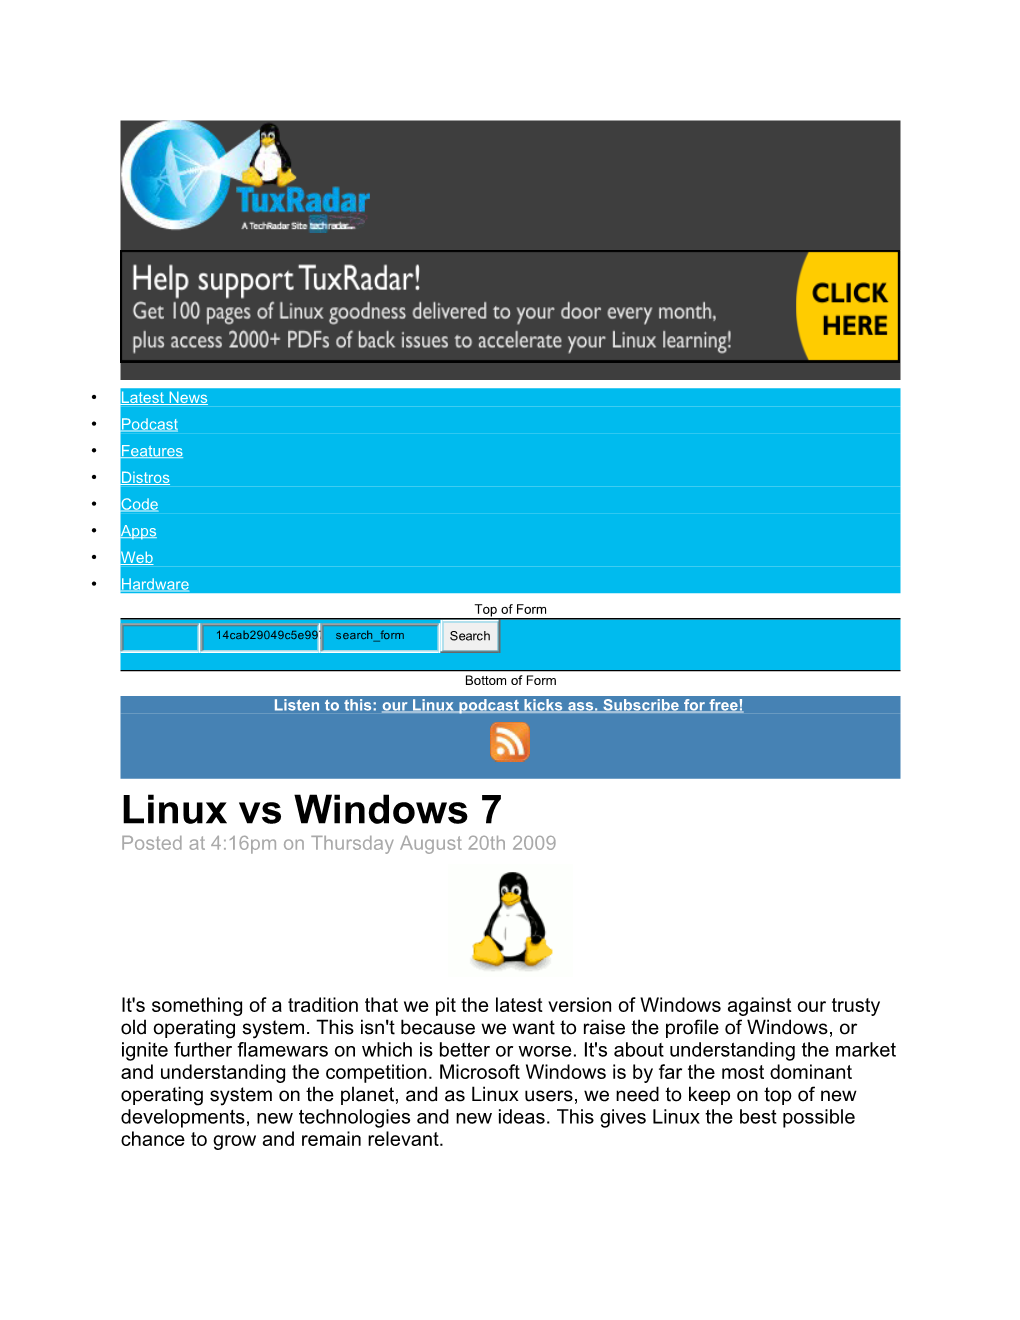 Linux Vs Windows 7 Posted at 4:16Pm on Thursday August 20Th 2009